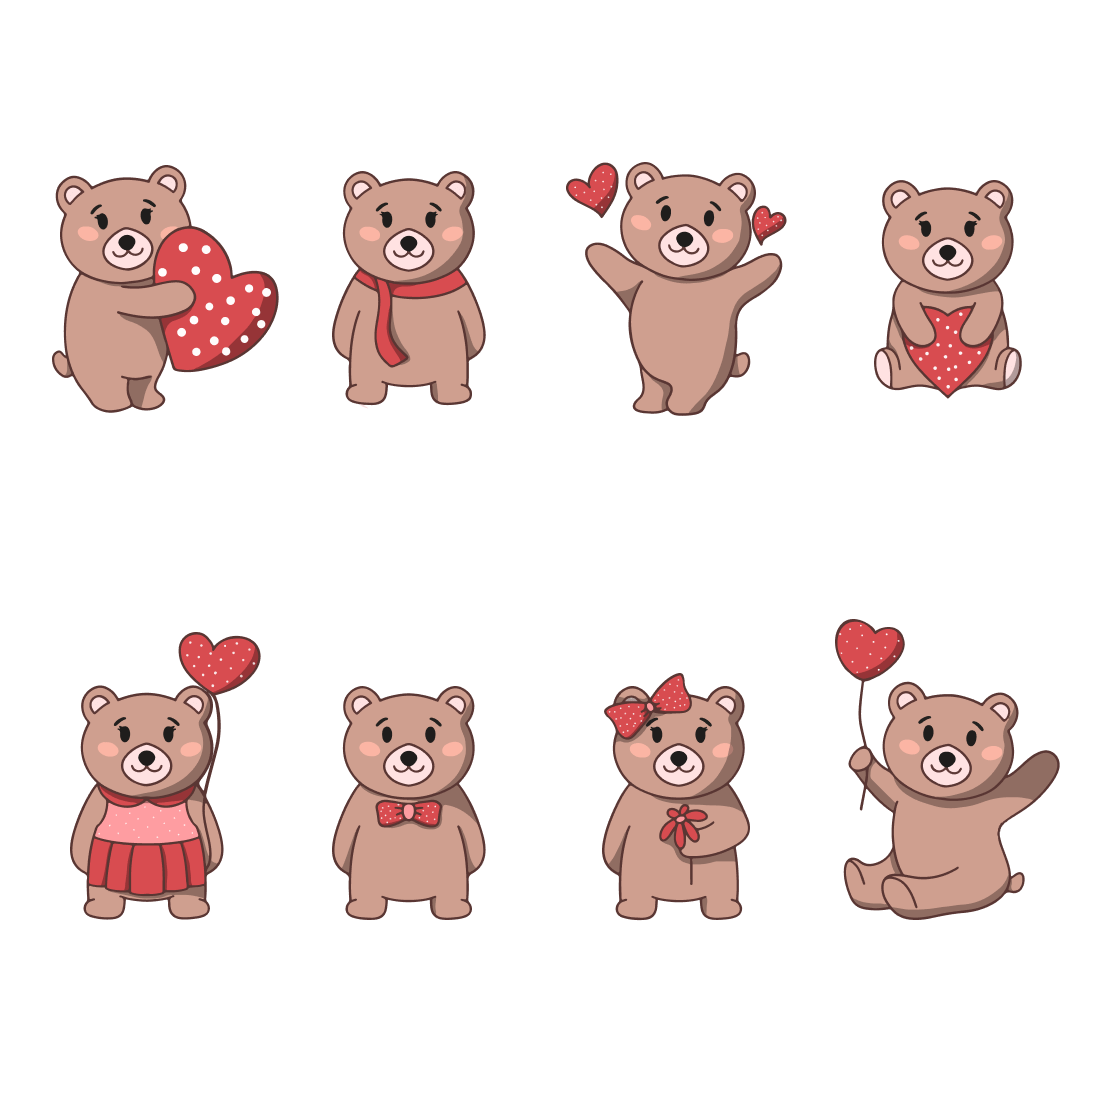 Group of teddy bears with hearts on their chests.